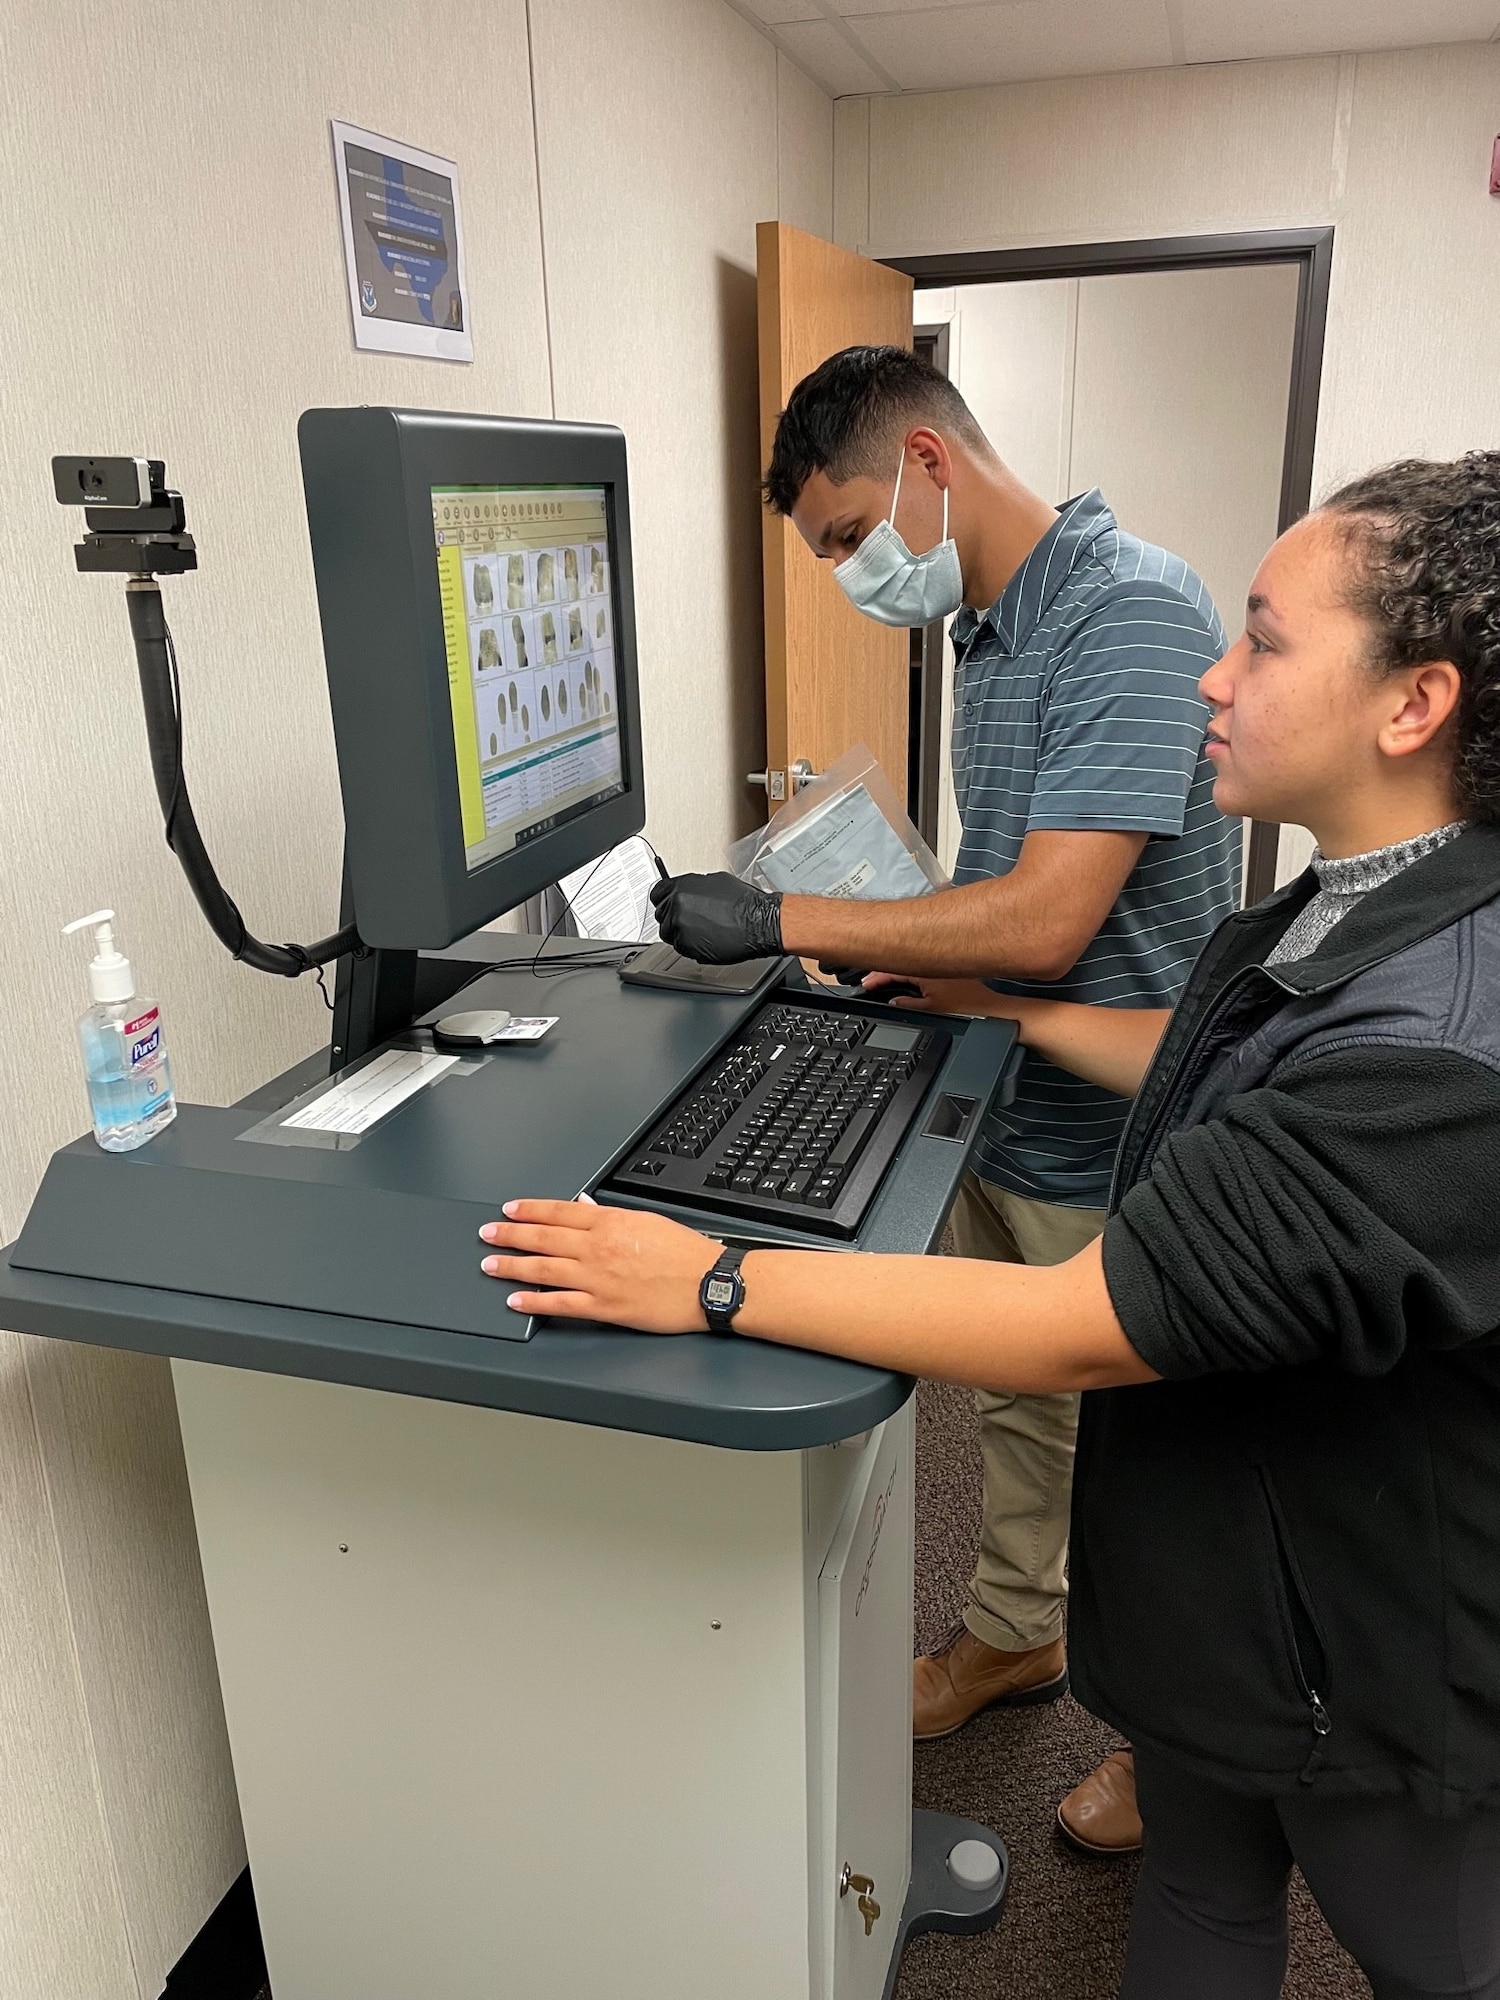 U.S. Air Force Special Agents Angela Velazquez-Colon, right, and Steven Hinojosa-Rodriguez, left, Department of the Air Force Office of Special Investigations Detachment 223, are utilizing the Livescan Management Software to capture and process fingerprints at Tyndall Air Force Base, Florida, June 22, 2022.